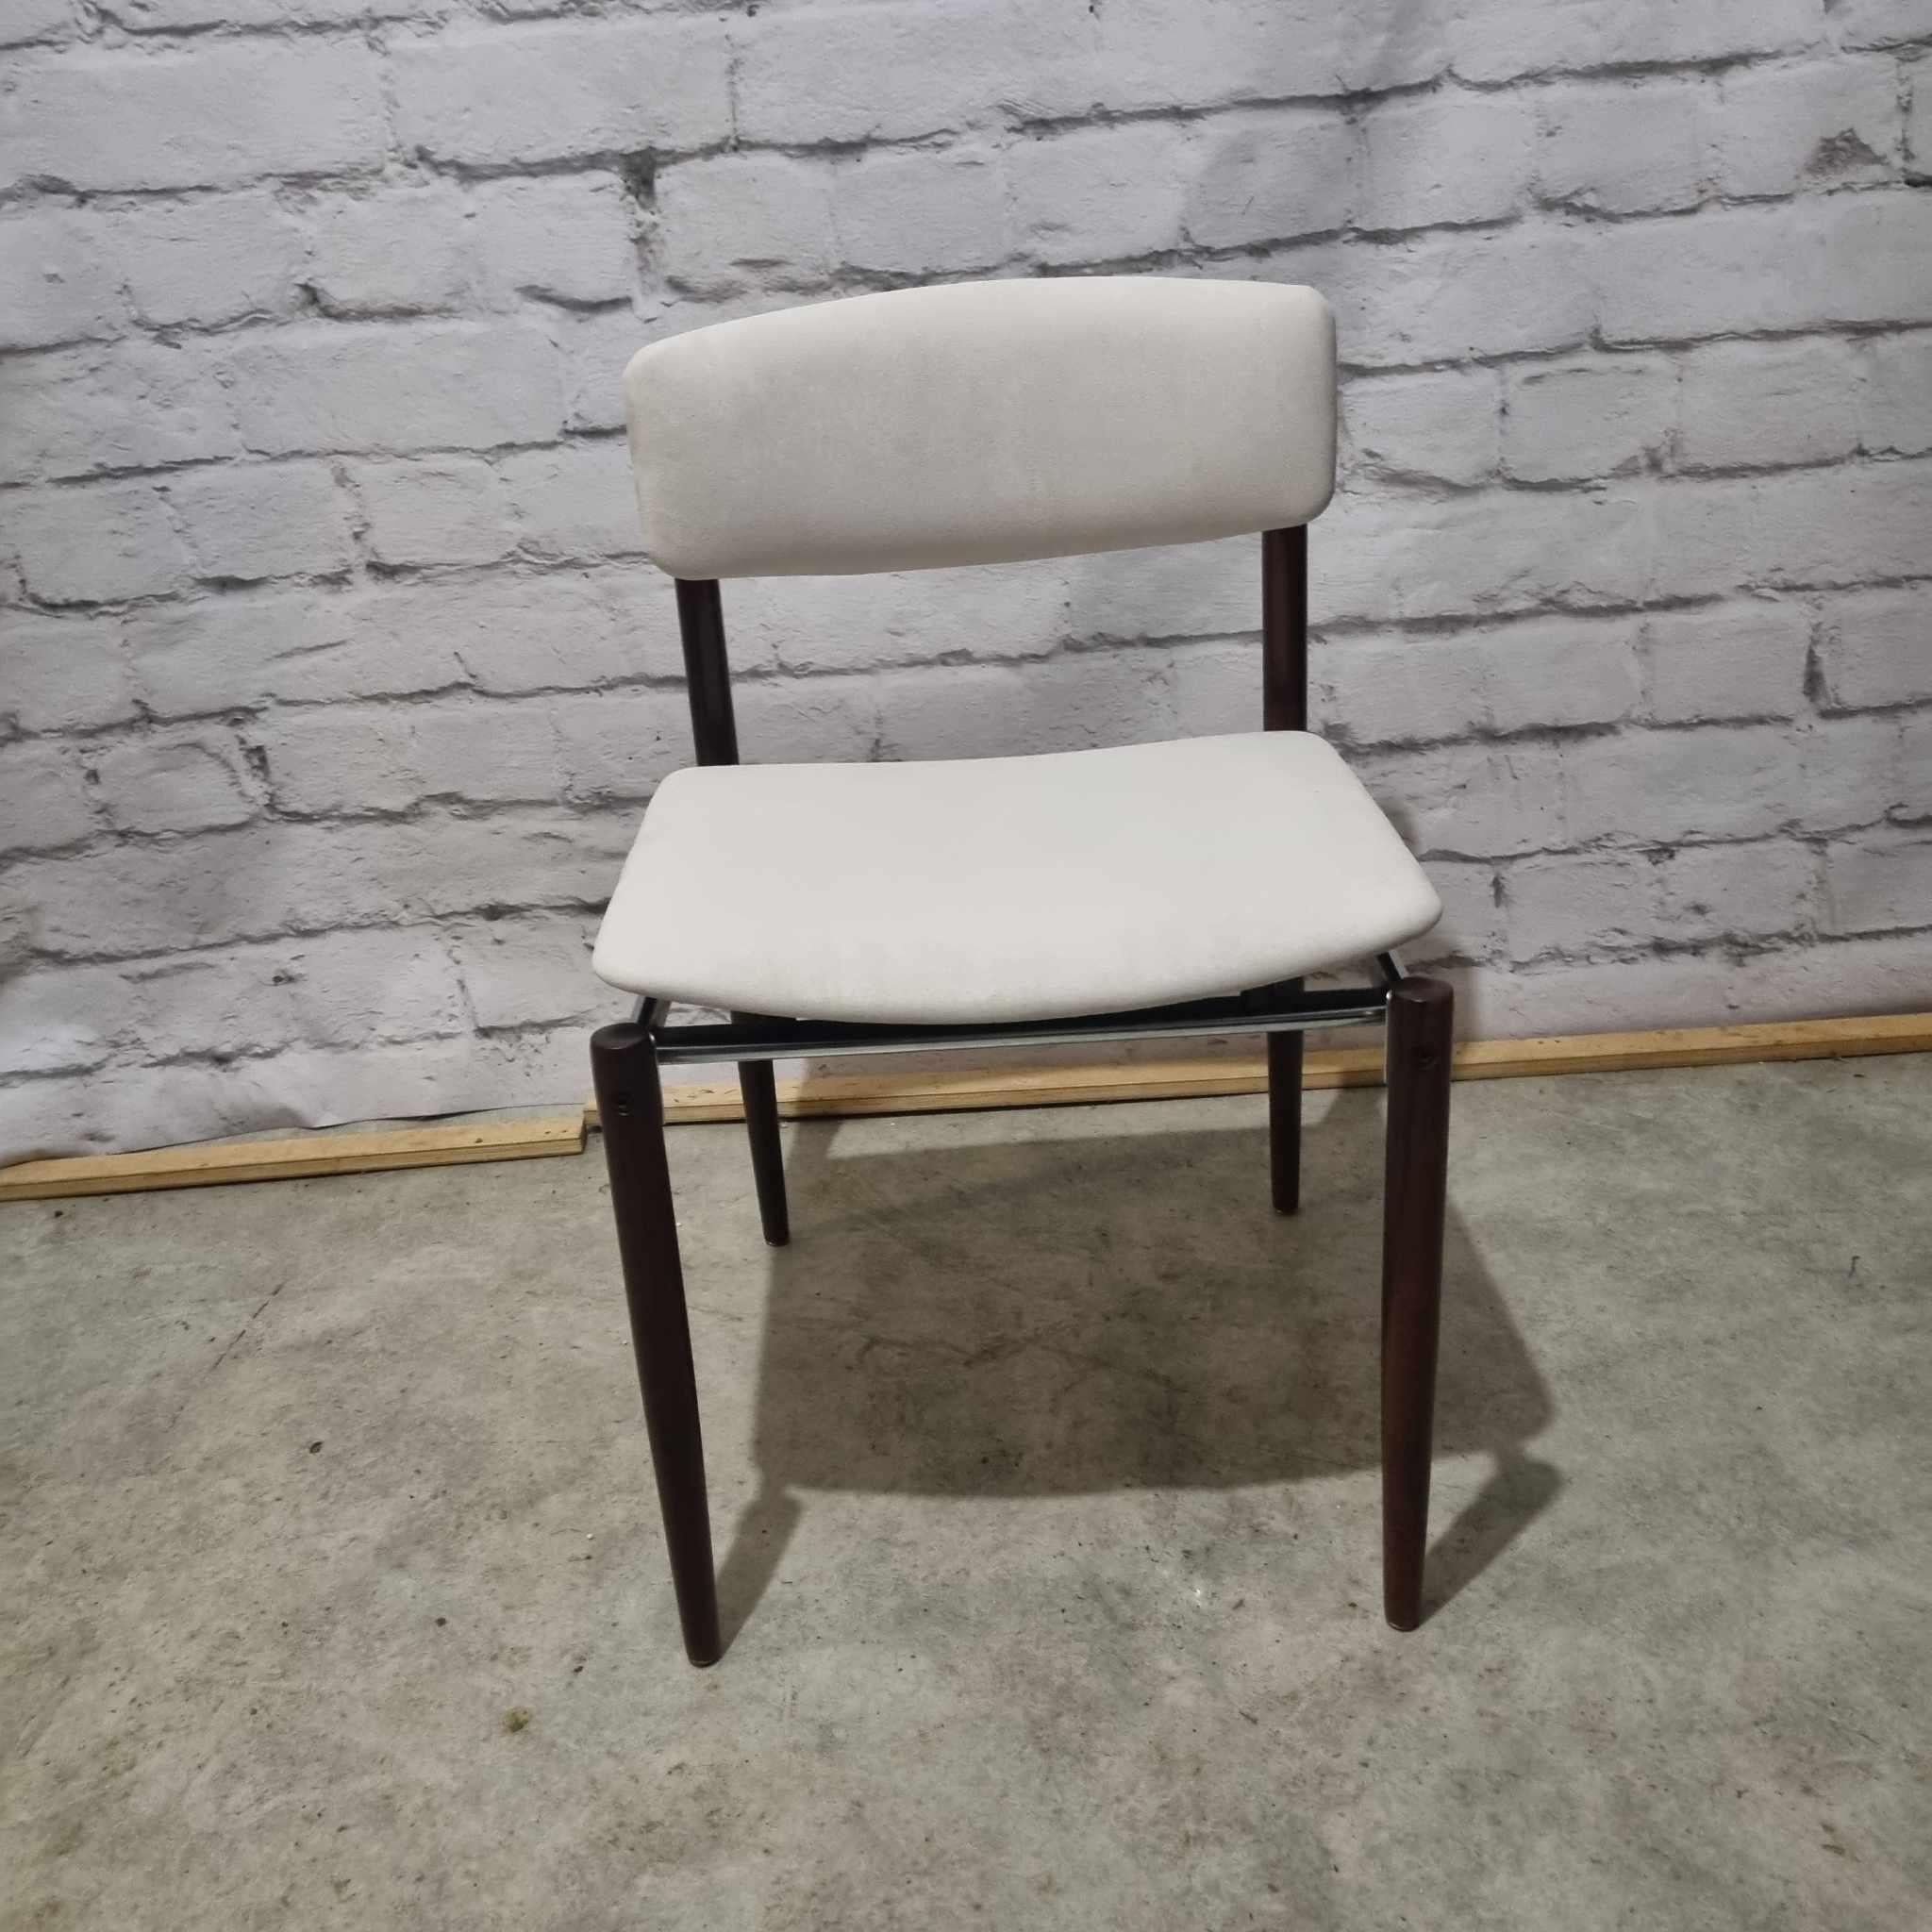 Beautiful dining chairs this set of 4.
Rosewood legs with chrome fittings in good condition. Designed by C Denekamp for Thereca in 1960. Sold in Netherlands by a company called TopForm. The chairs have been renovated, they received a new filling and